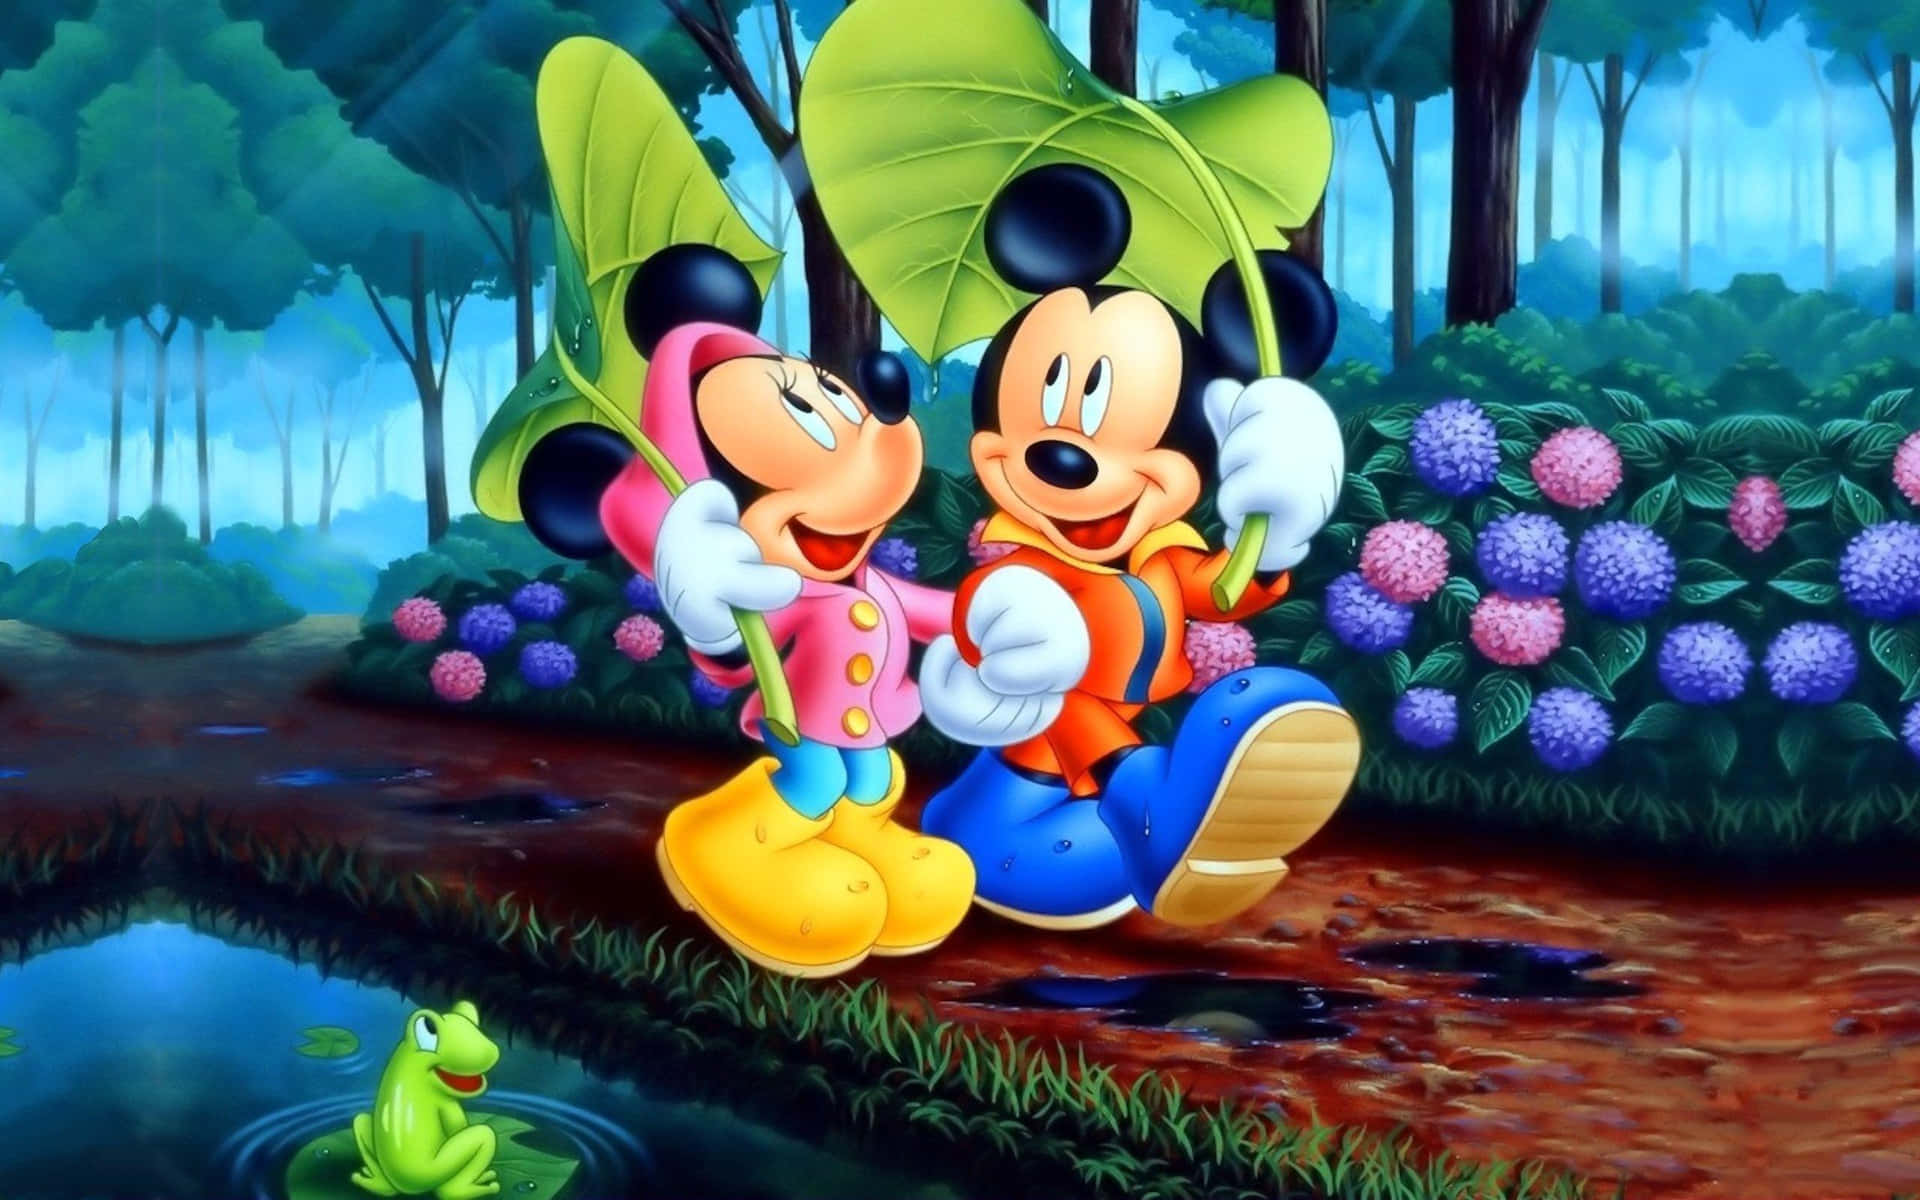 Download Mickey Mouse And Minnie Mouse In The Forest | Wallpapers.com